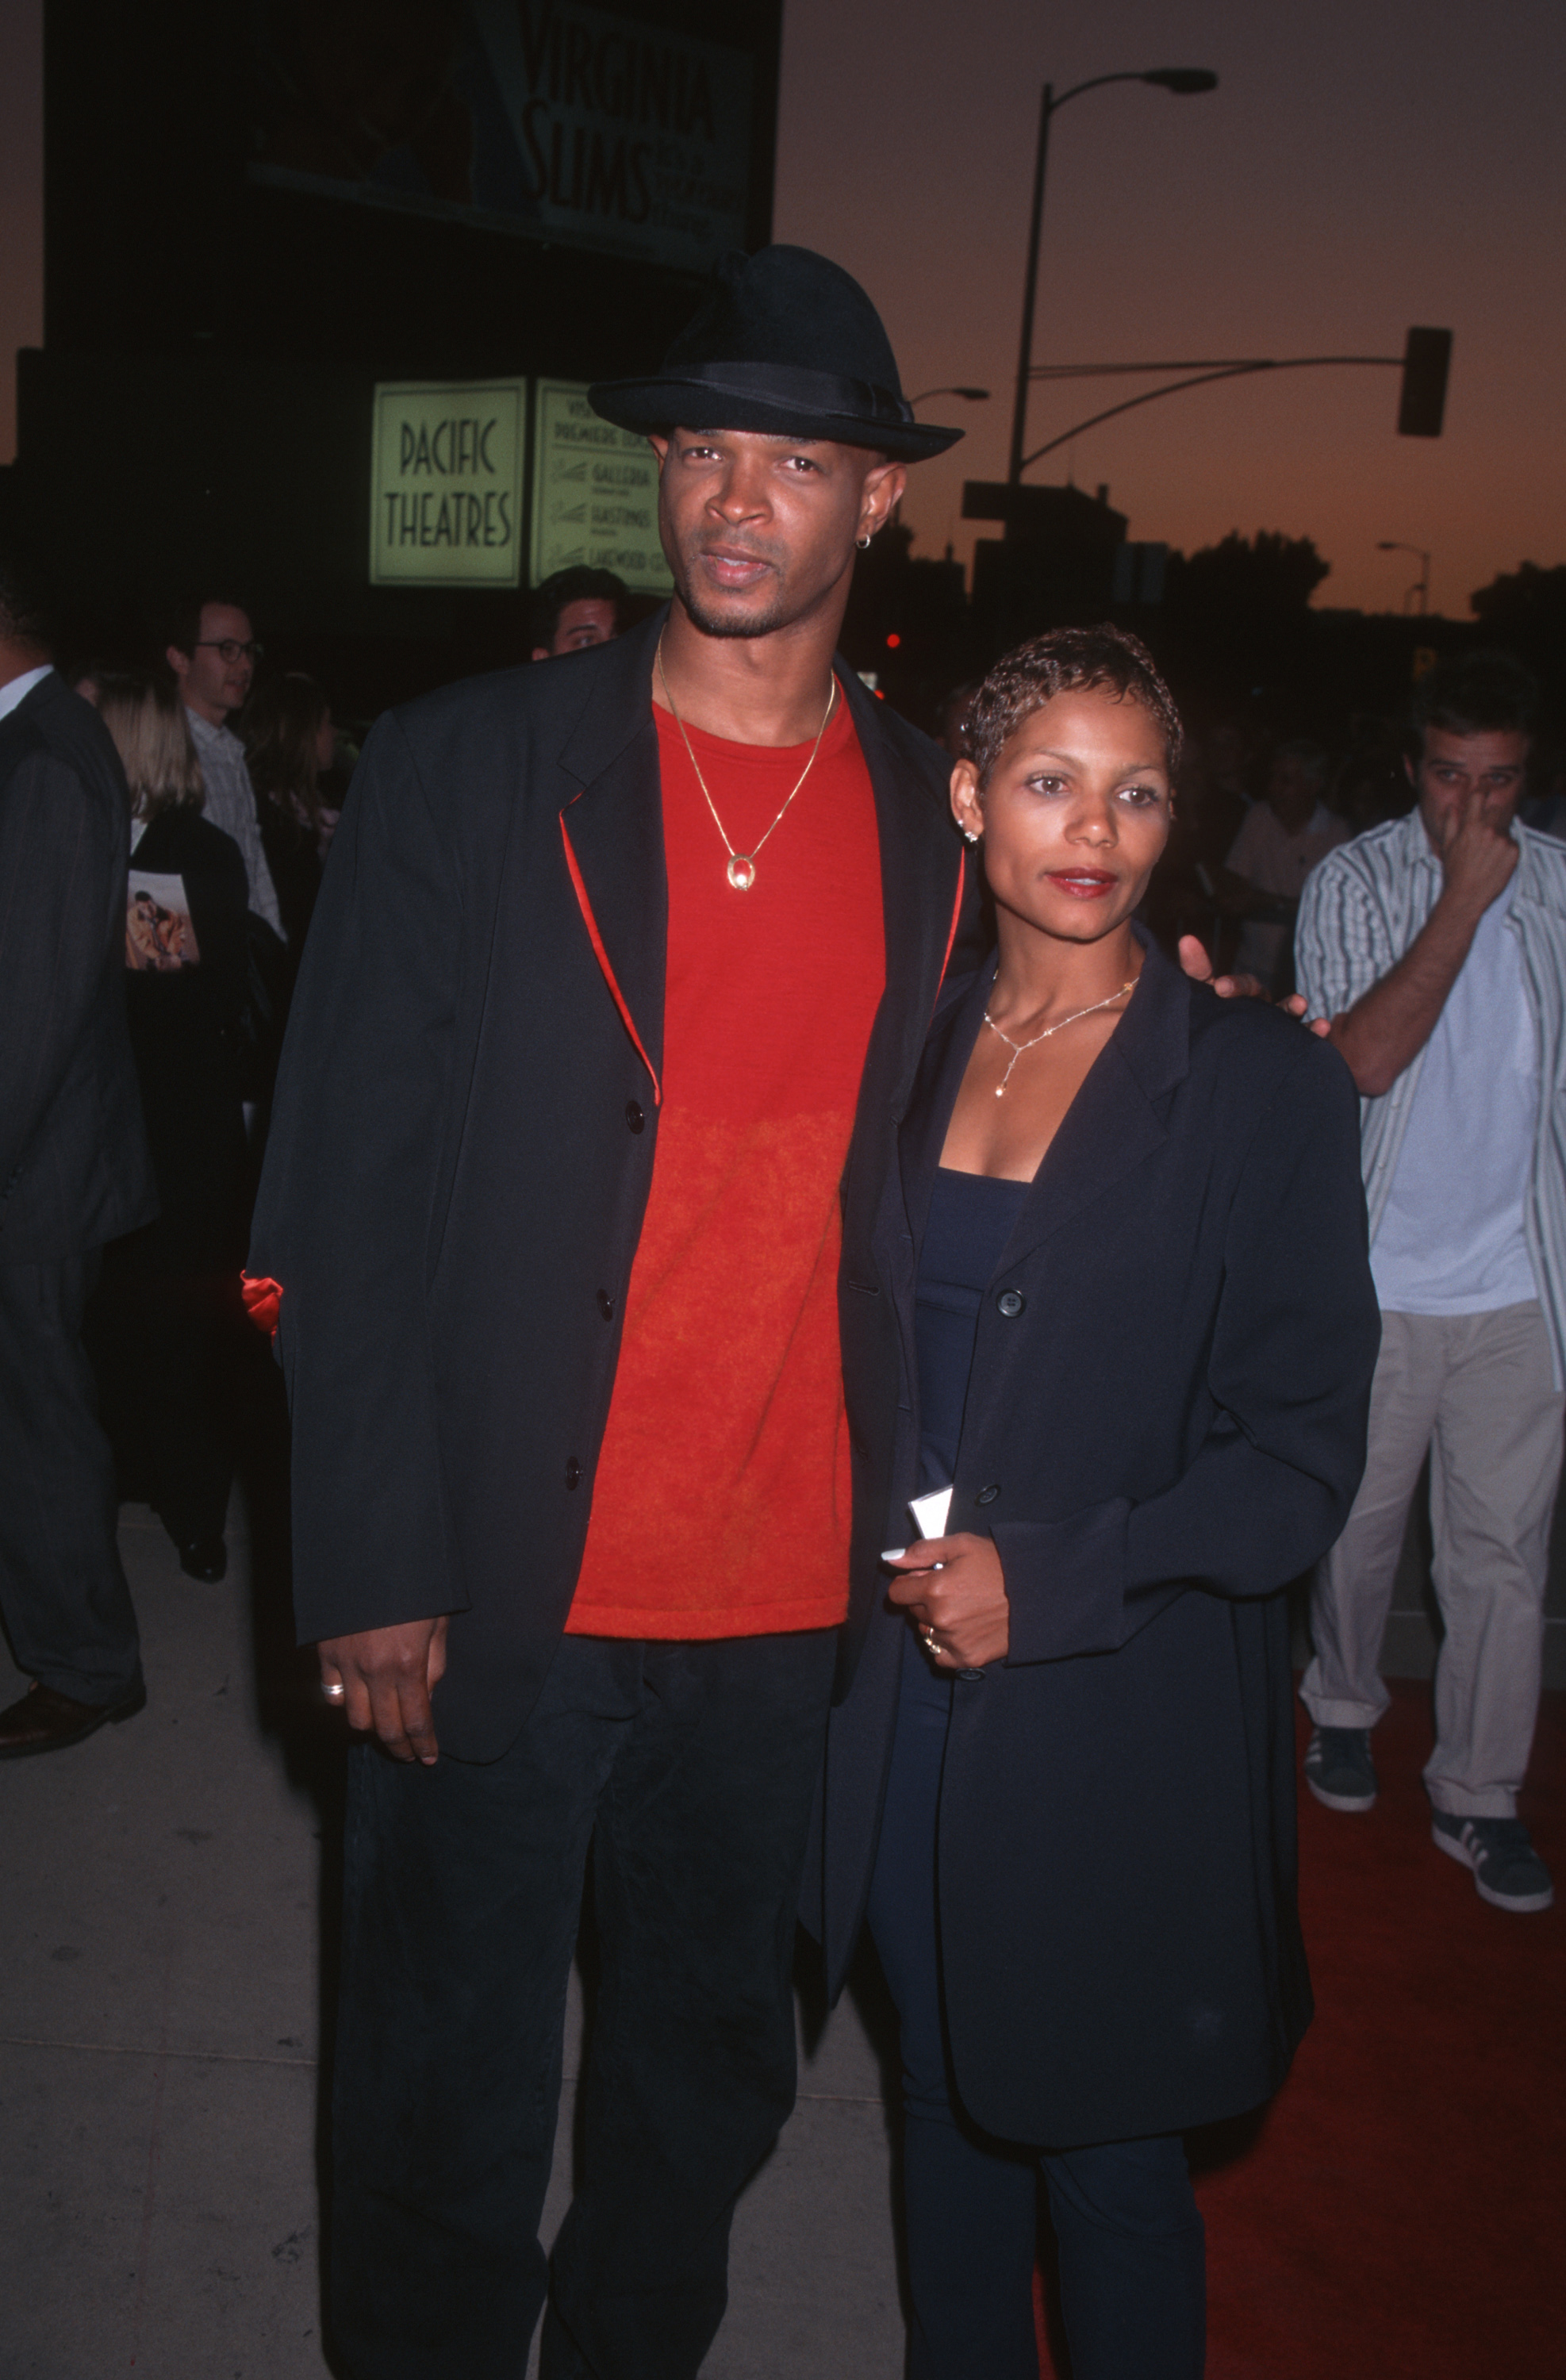 Damon Wayans and Lisa Thorner attending the premiere of "Bulletproof" on August 28, 1996, at the Cinerama Dome Theater, in Hollywood, California. | Source: Getty Images